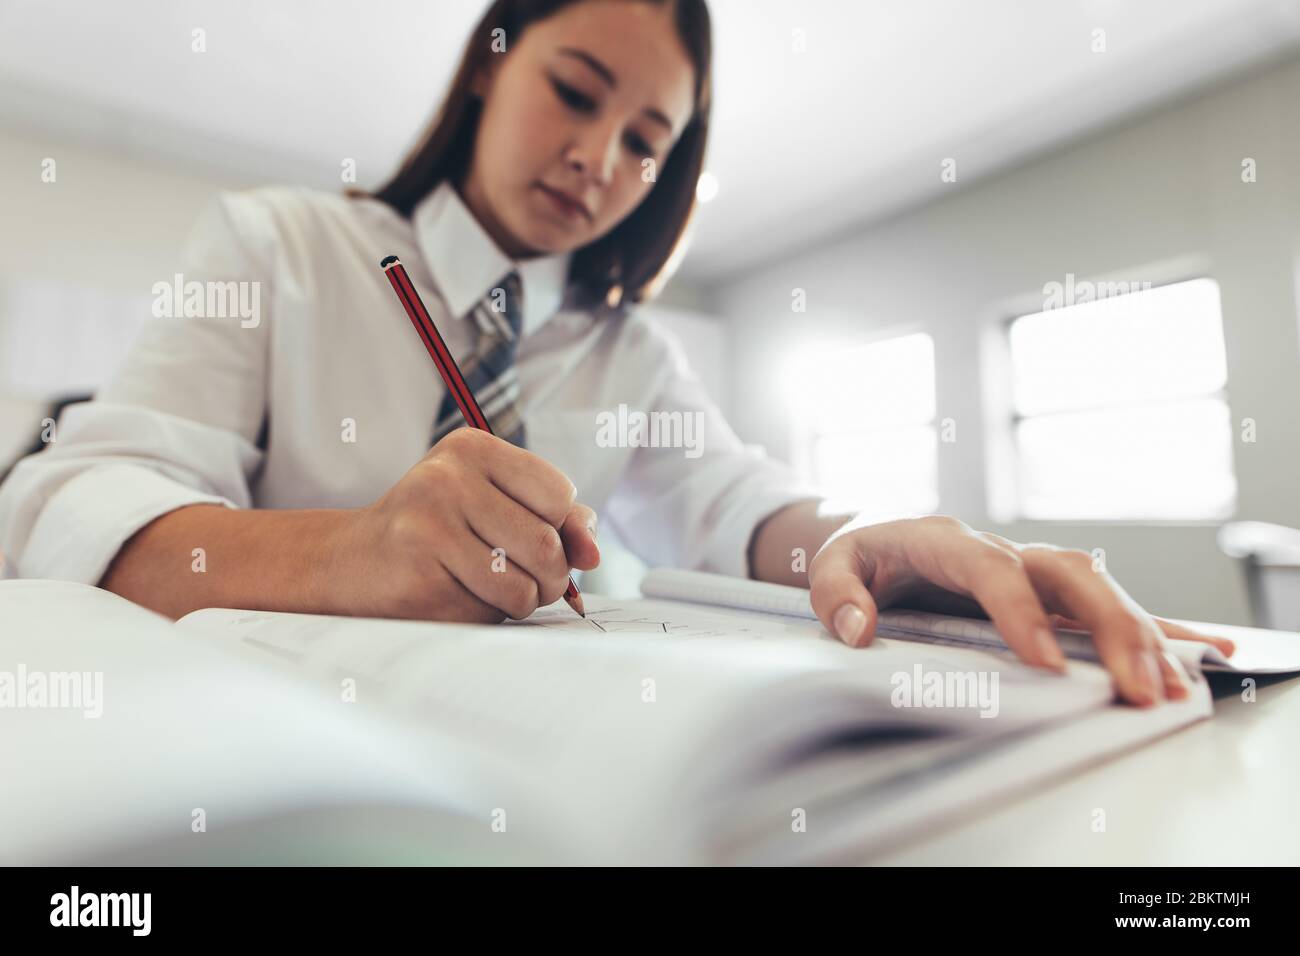 Female student in uniform writing in a book while sitting at desk in high school classroom. Girl student concentrating while writing in a book. Stock Photo